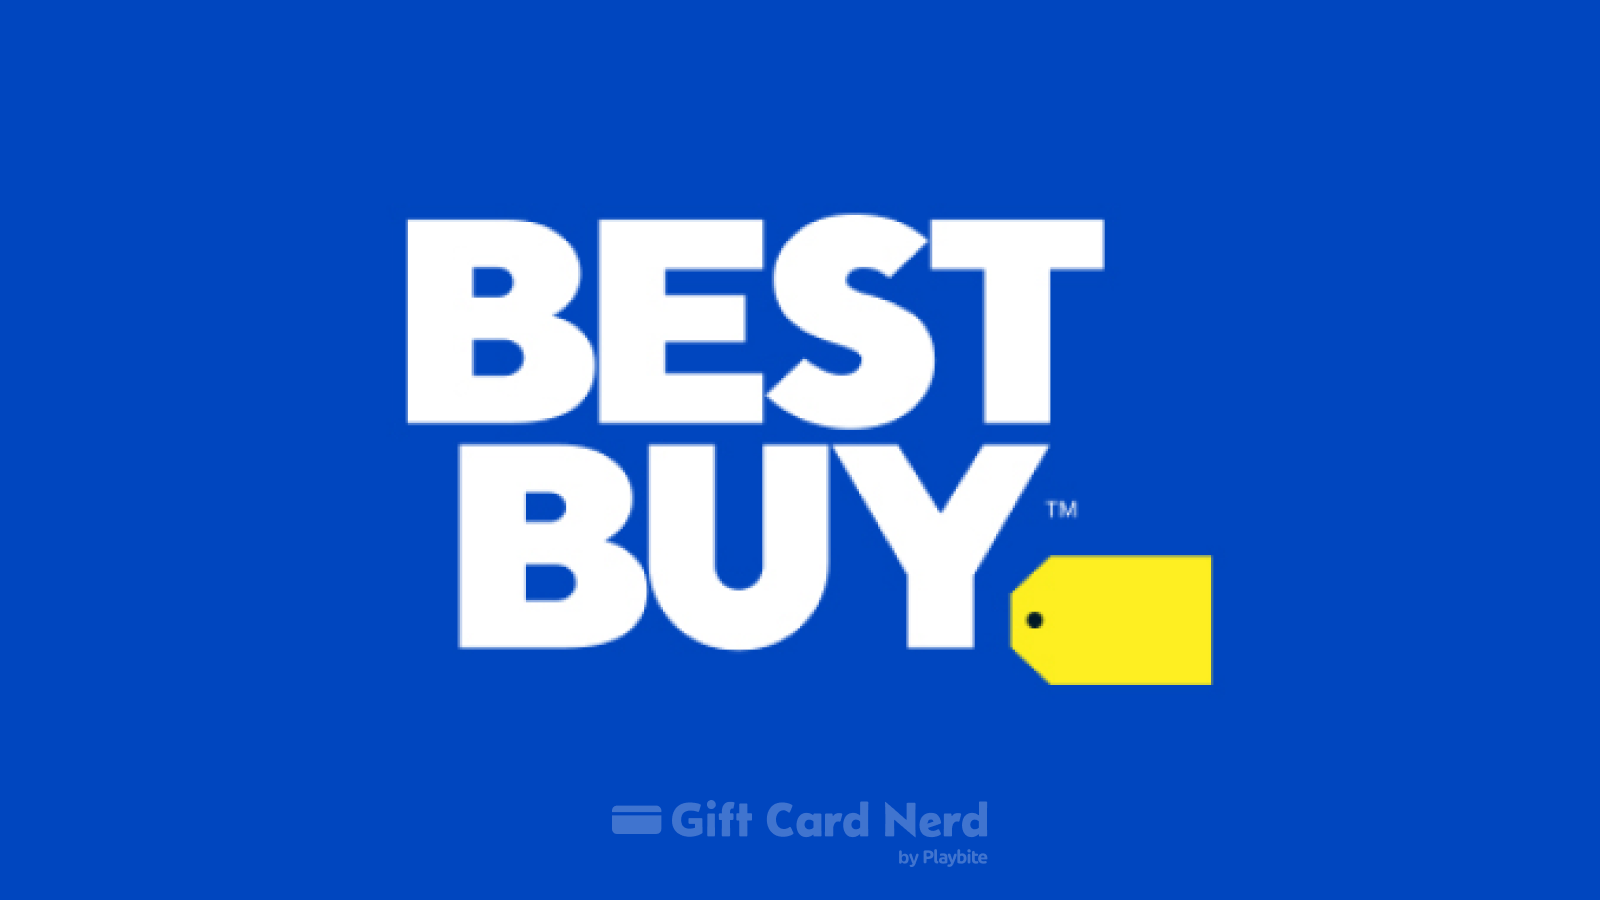 Can I Use a Best Buy Gift Card on Amazon?